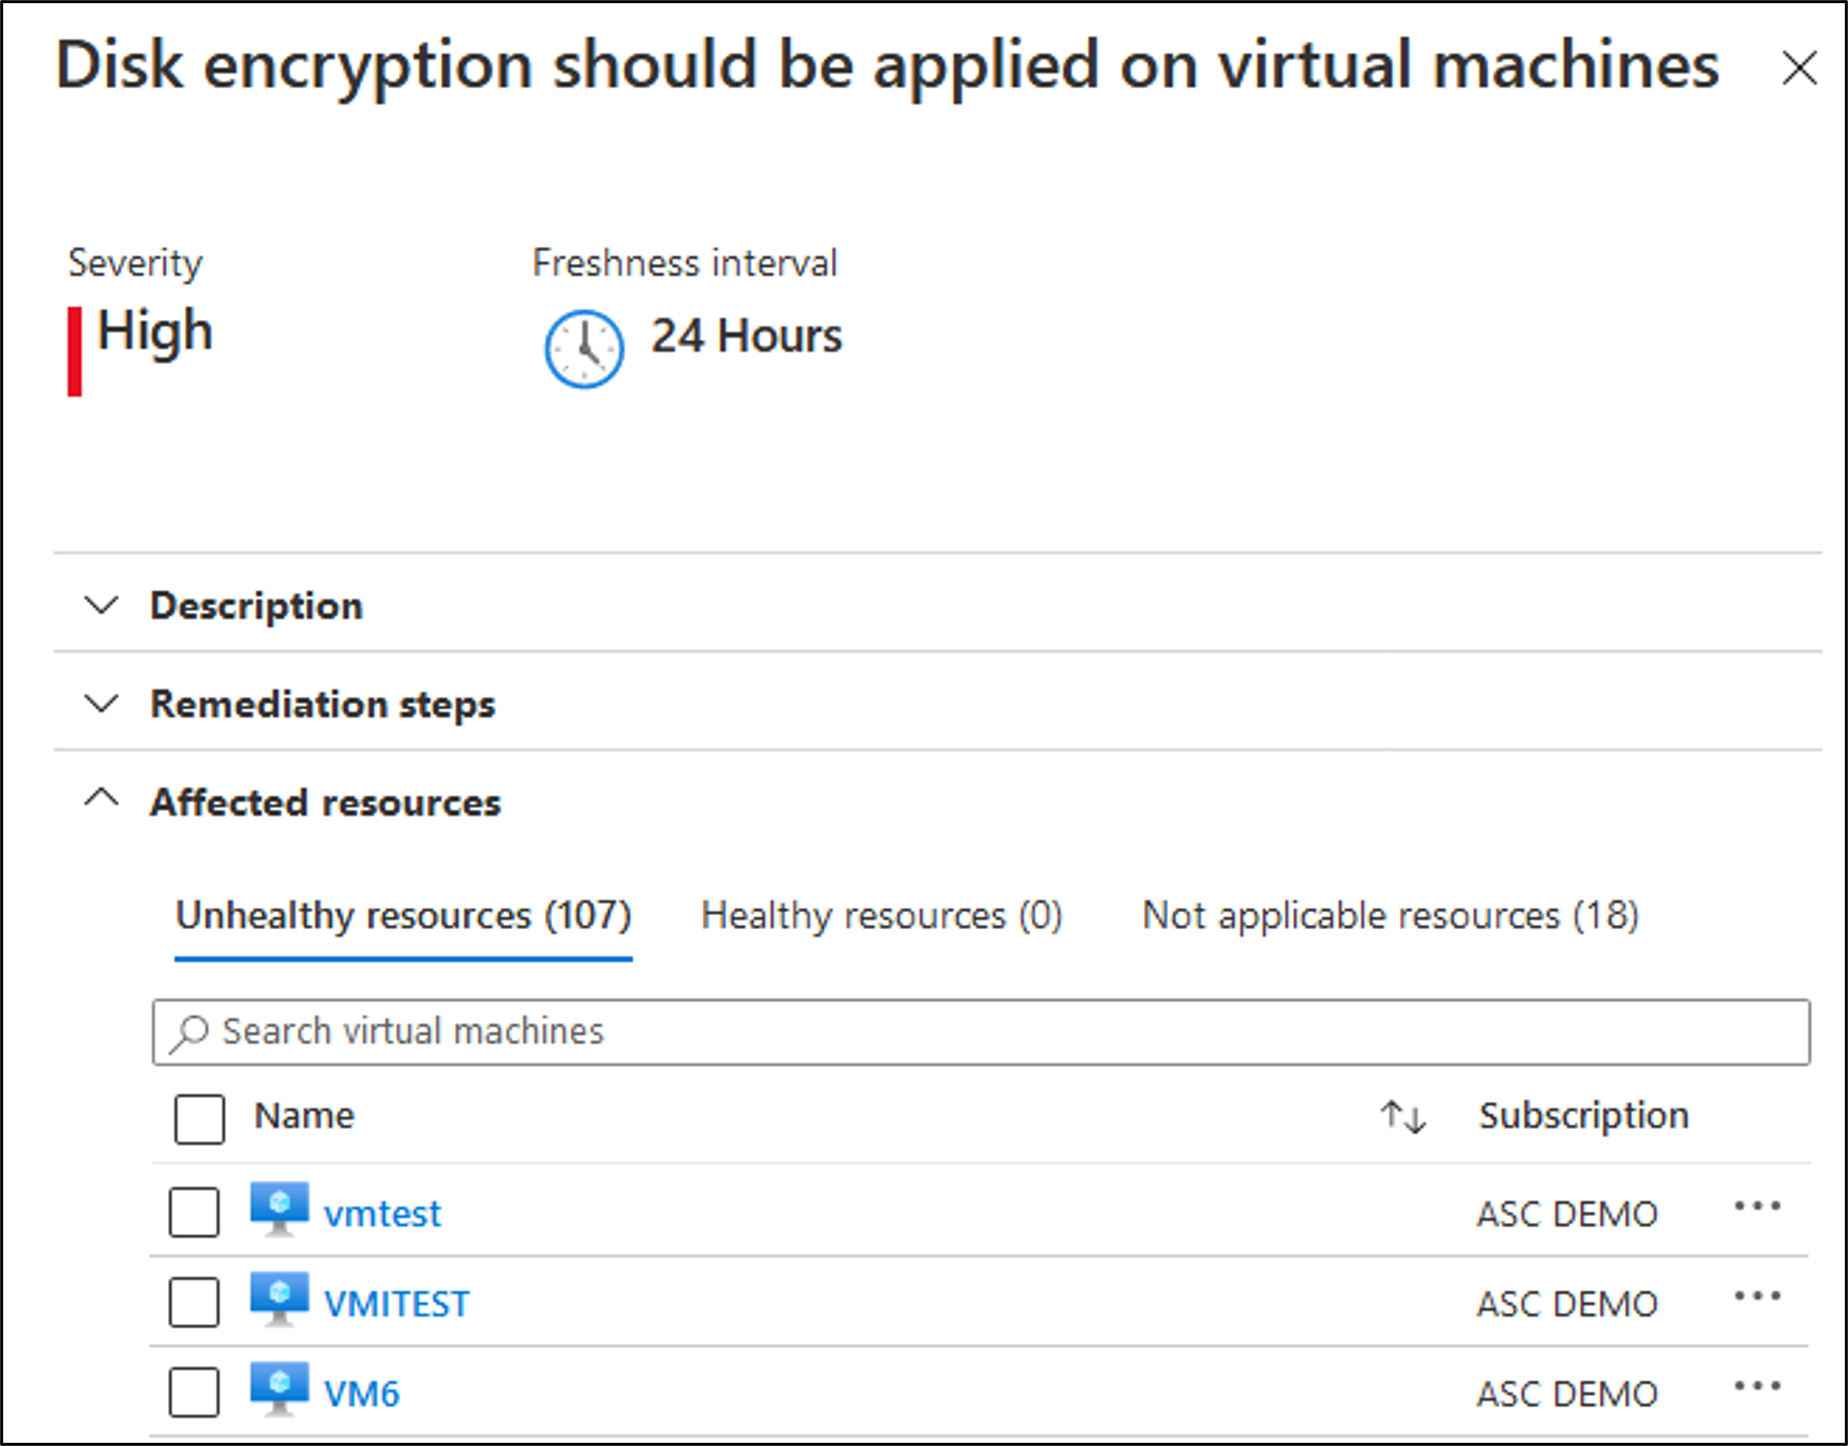 Screenshot showing that disk encryption should be applied on virtual machines.